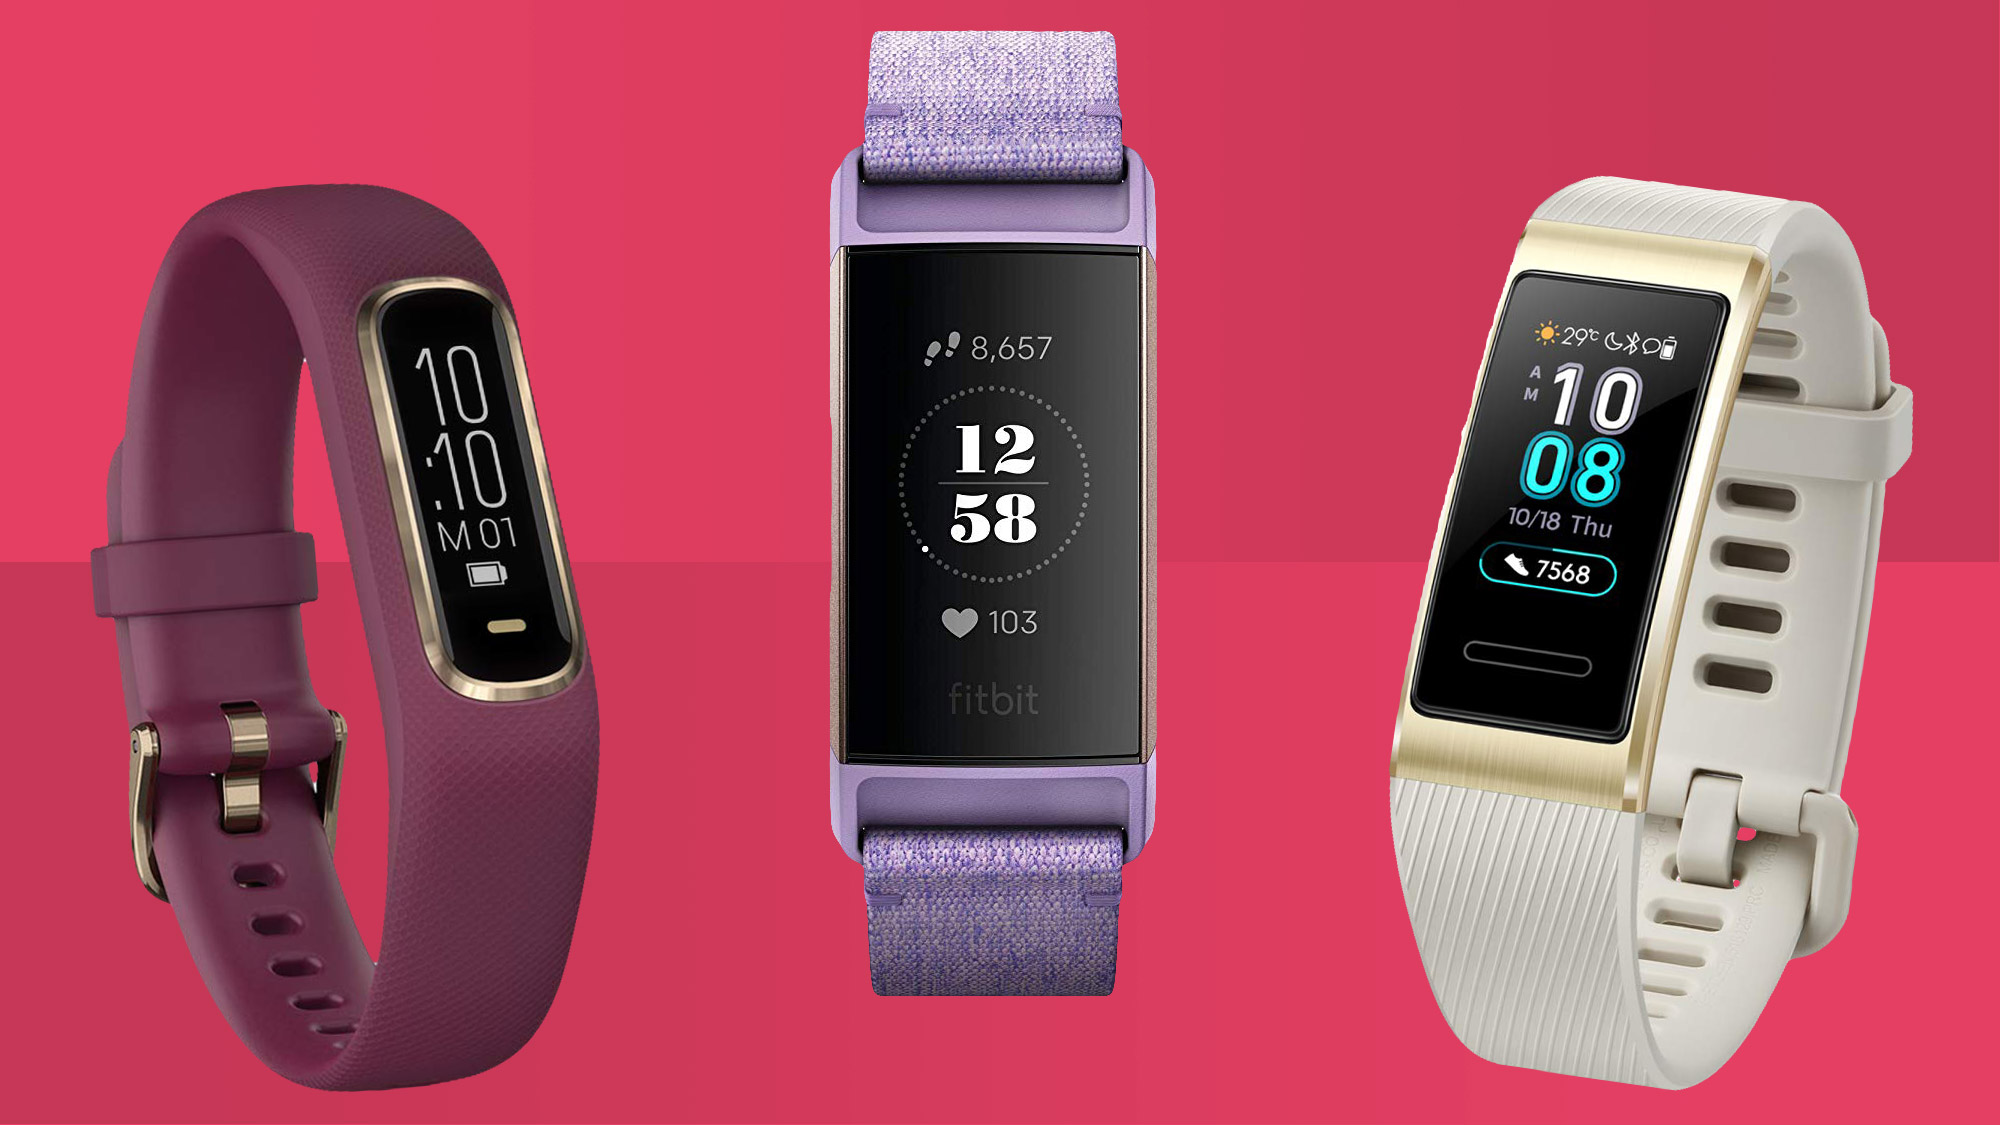 The best fitness trackers 2020: the best activity bands you can buy today | TechRadar